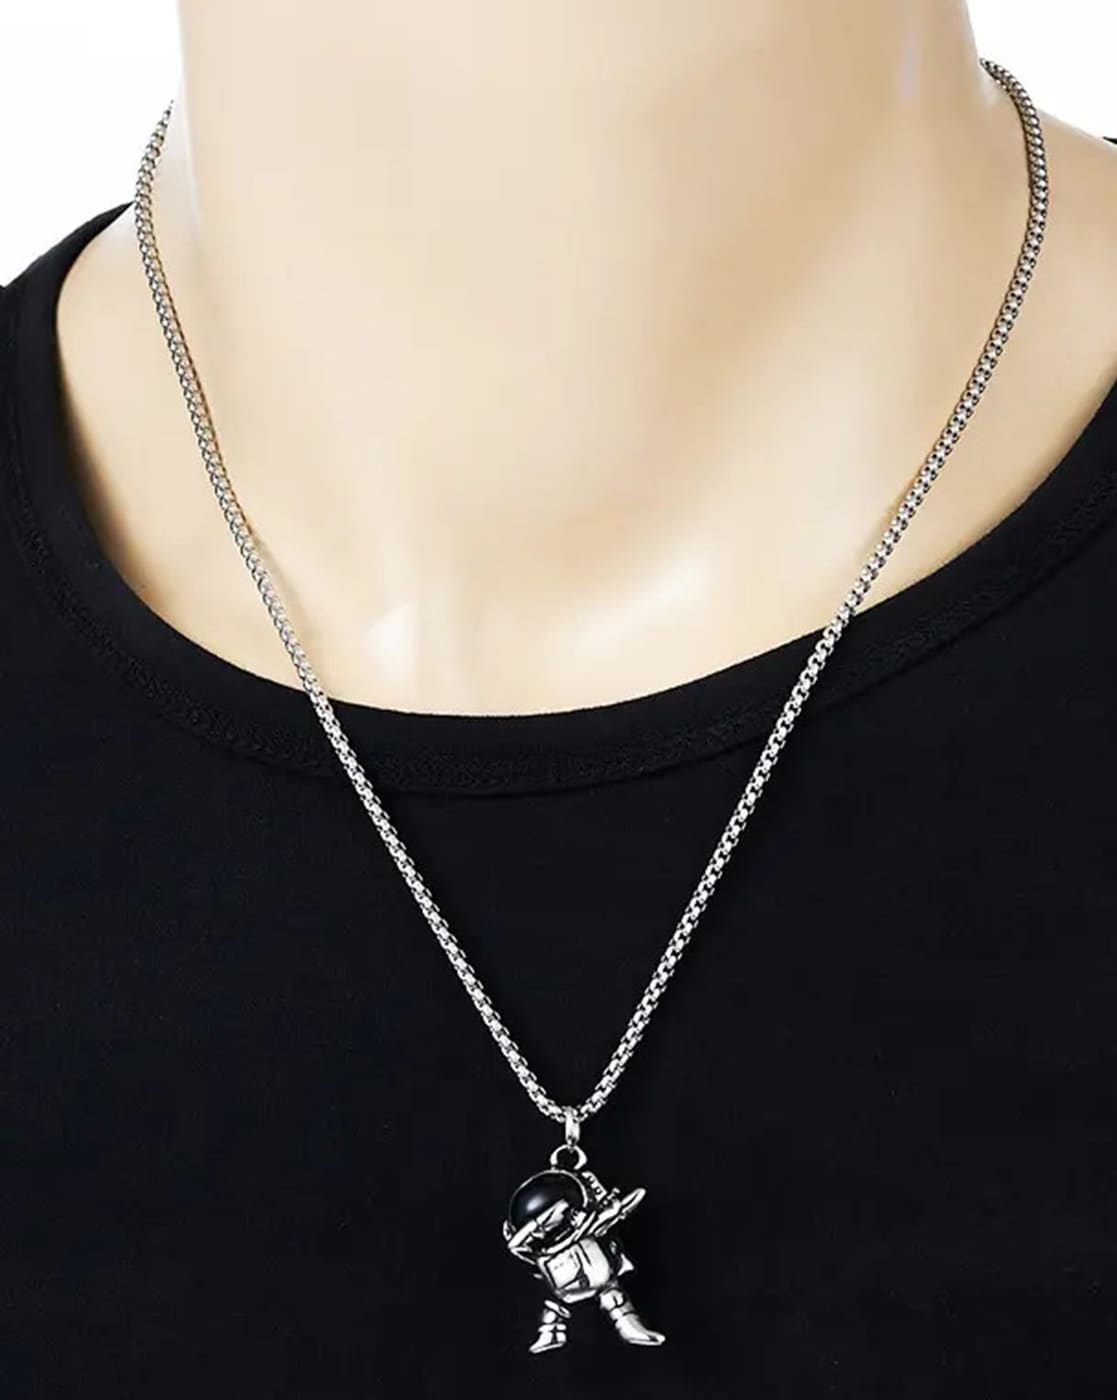 Buy Silver-Toned Chains for Men by Salty Online